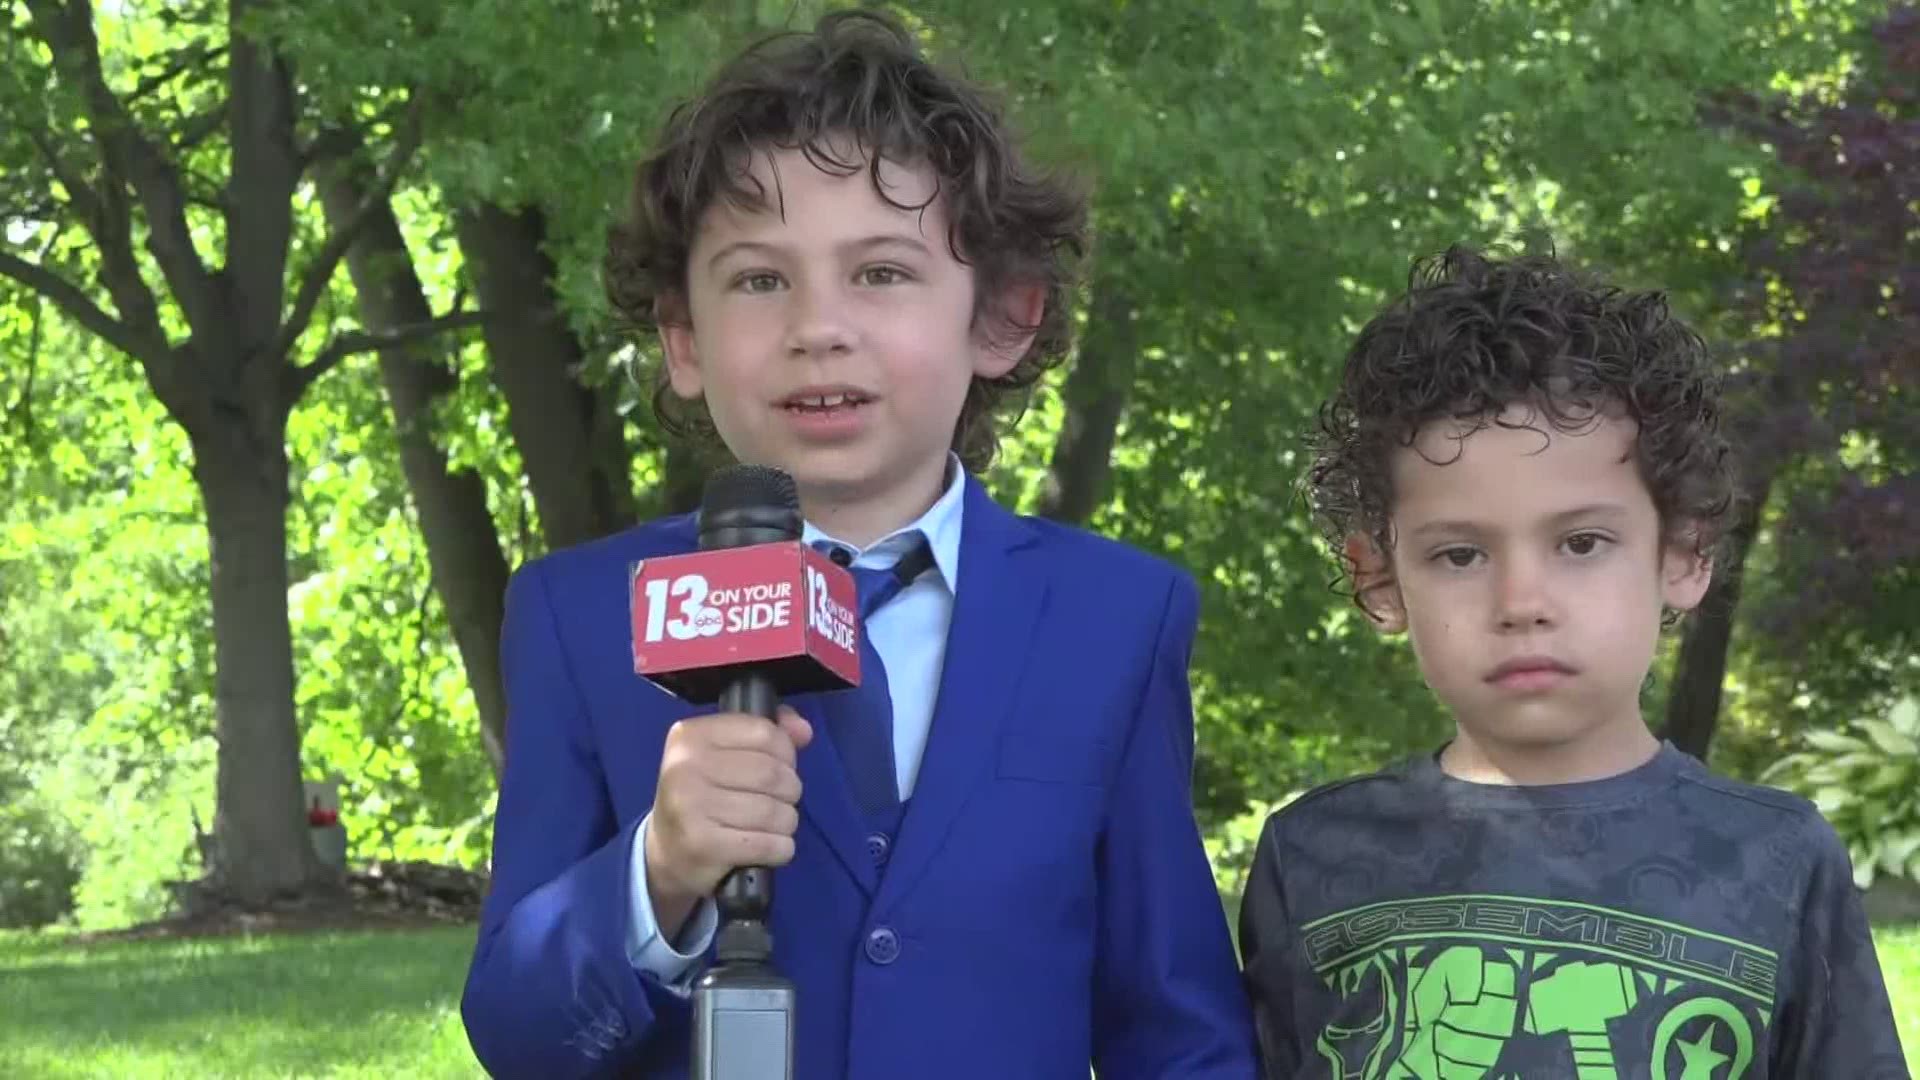 Nine-year-old Aiden Zea and his 5-year-old brother Quentin were inspired by the John Krasinski show of the same name.